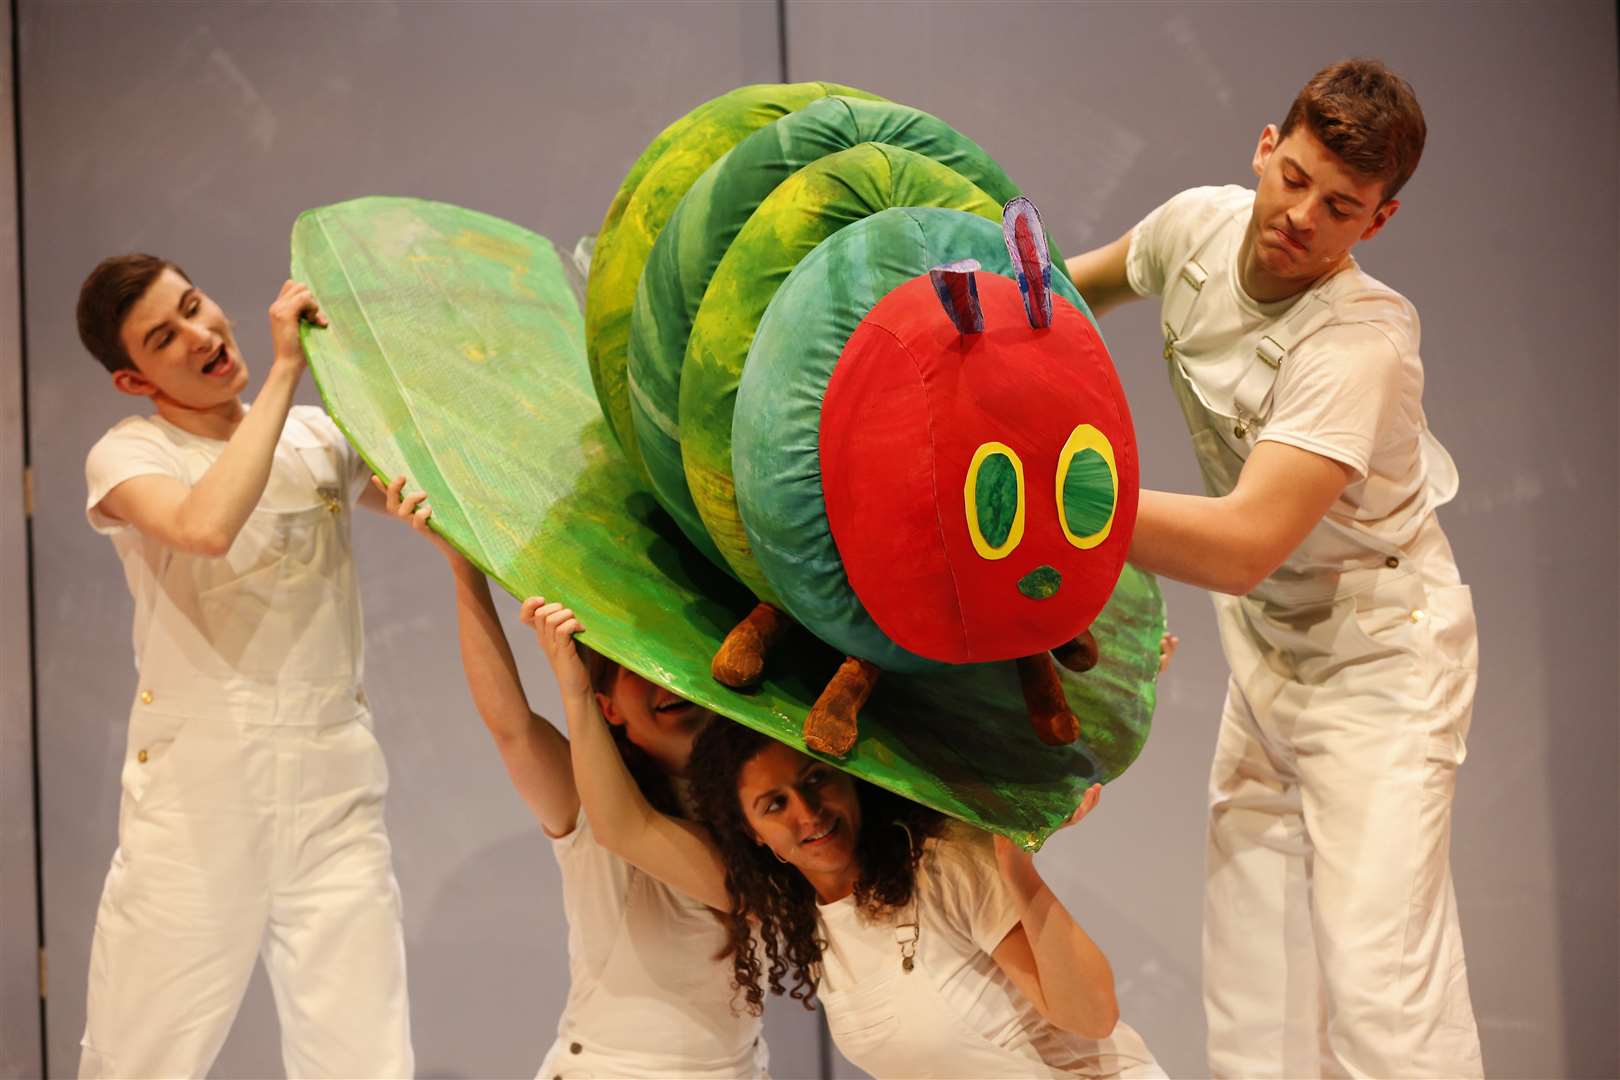 The Very Hungry Caterpillar Show is coming to Folkestone